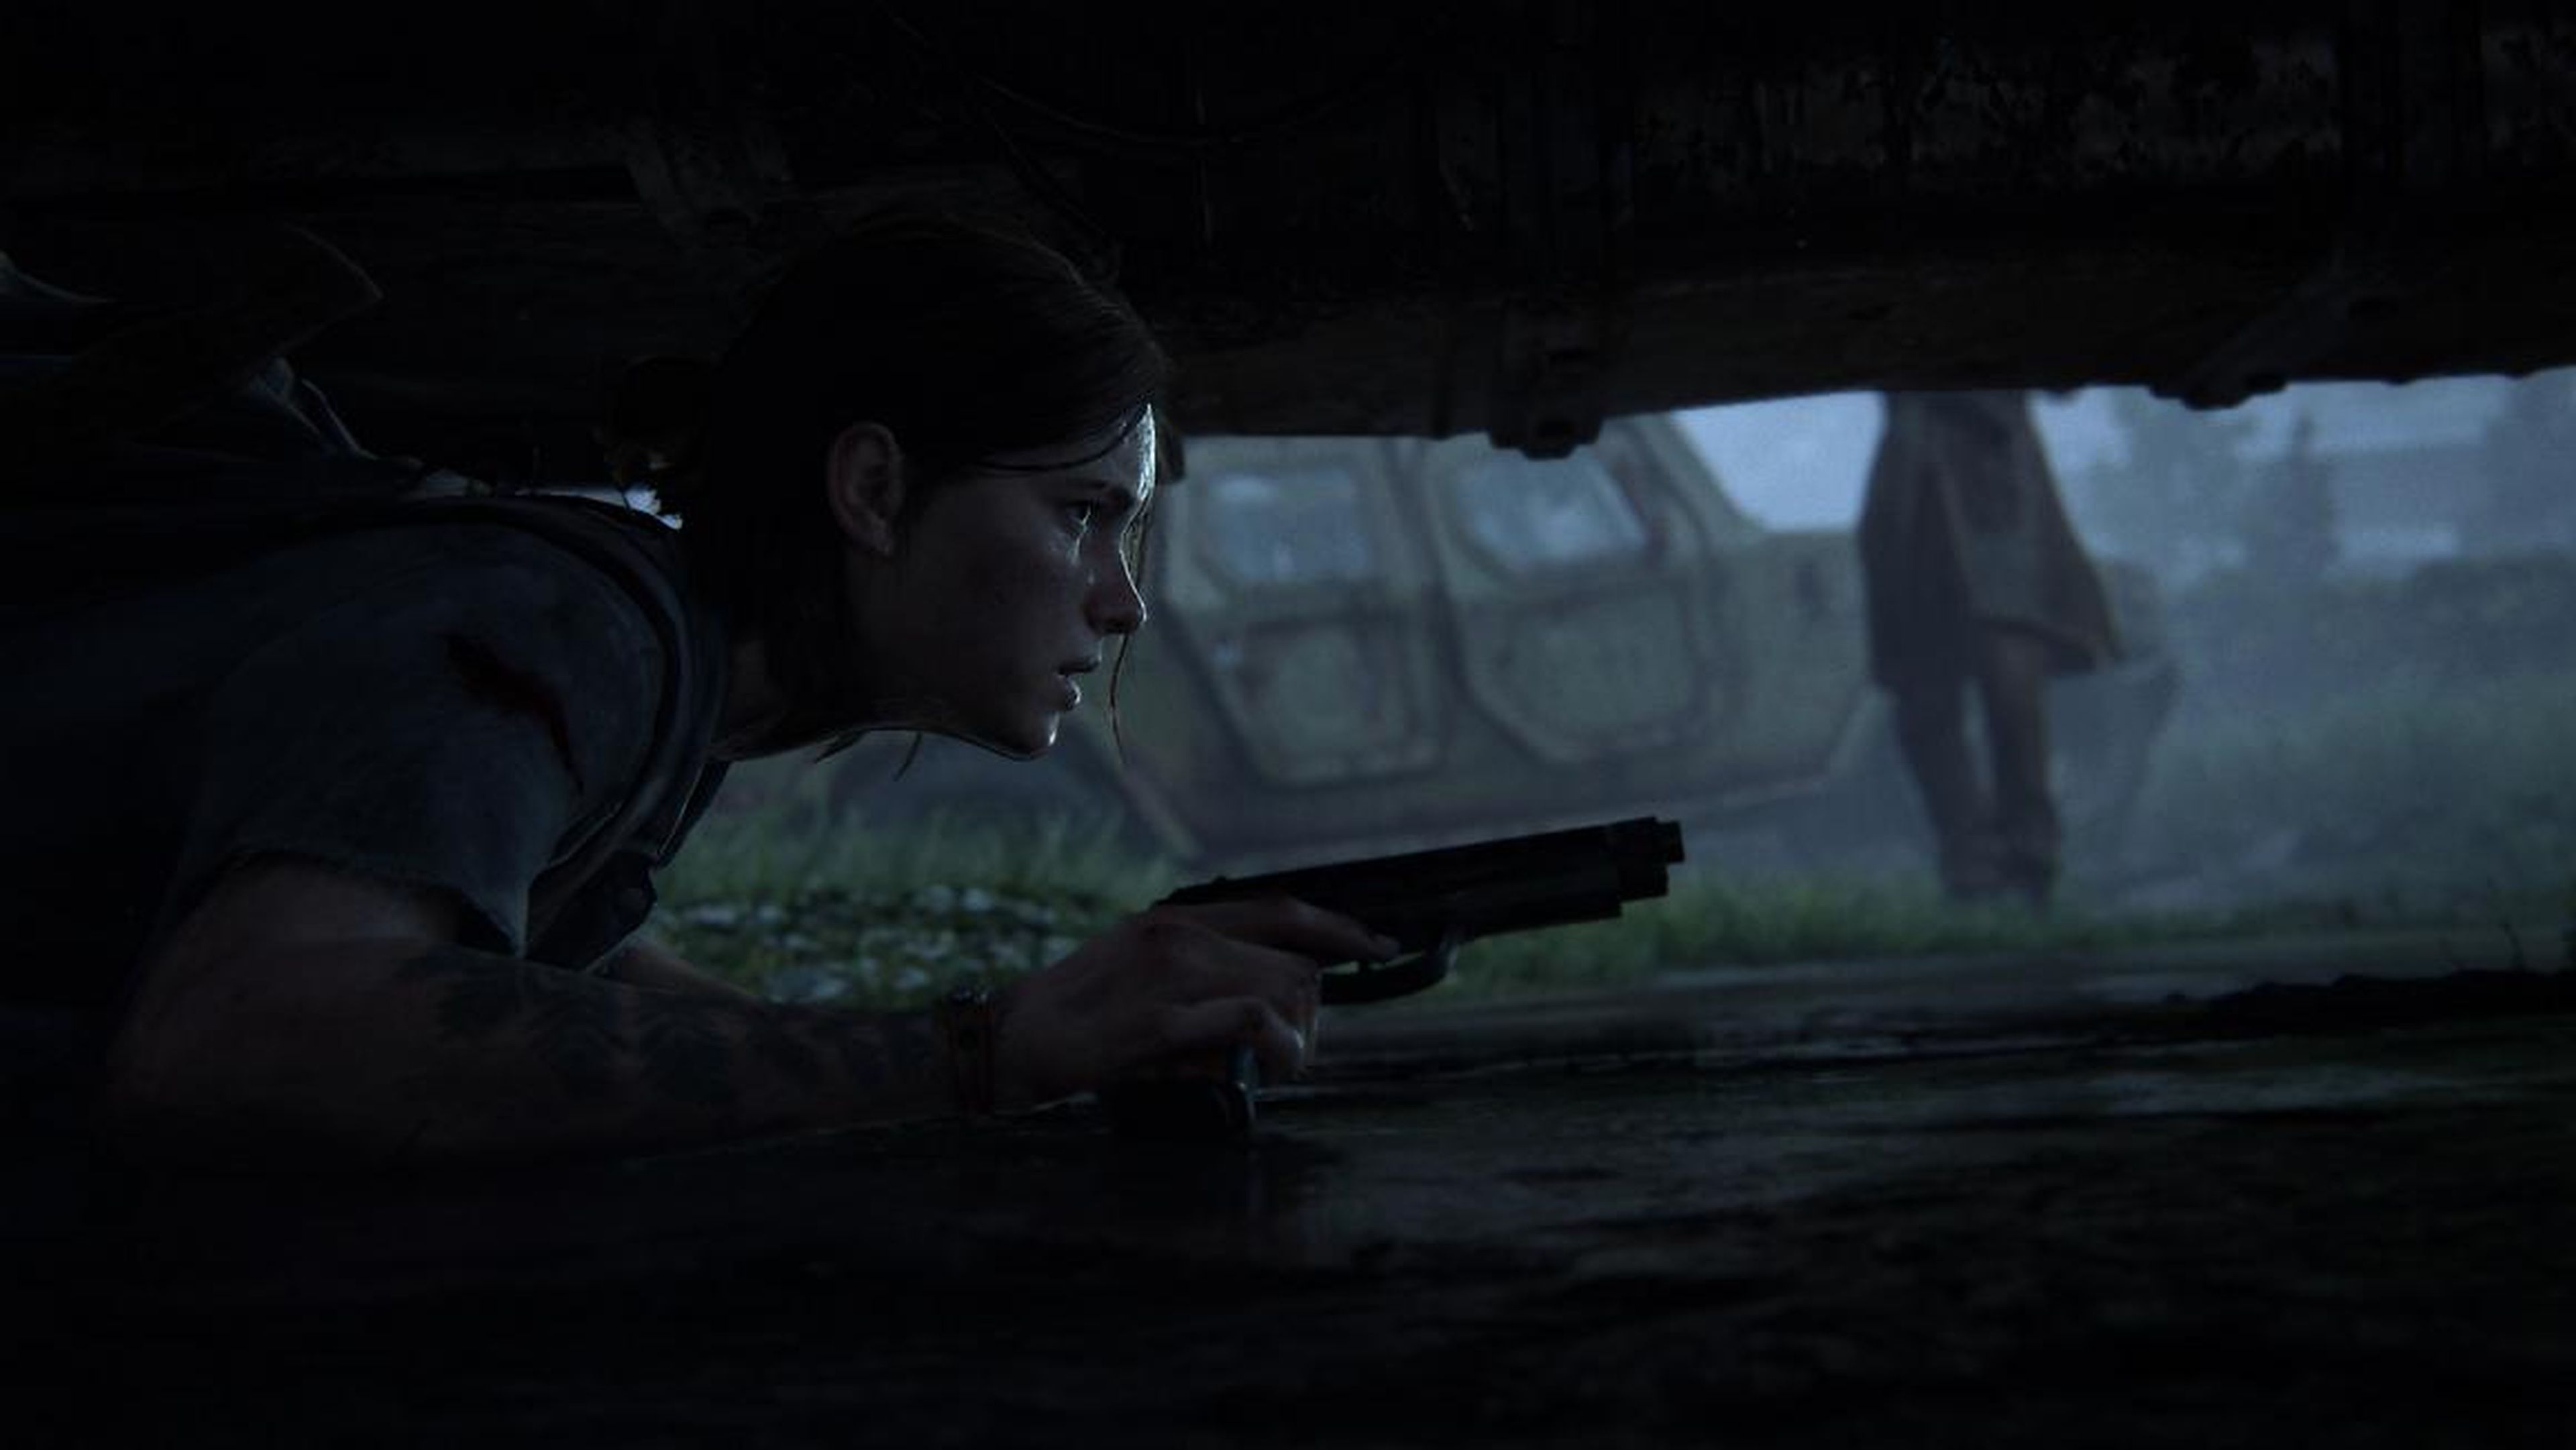 Using stealth to sneak past groups of enemies is an important part of the "The Last of Us." Ellie will be able to jump and dodge enemy attacks at close range too — extra movements that weren't possible in the first game.